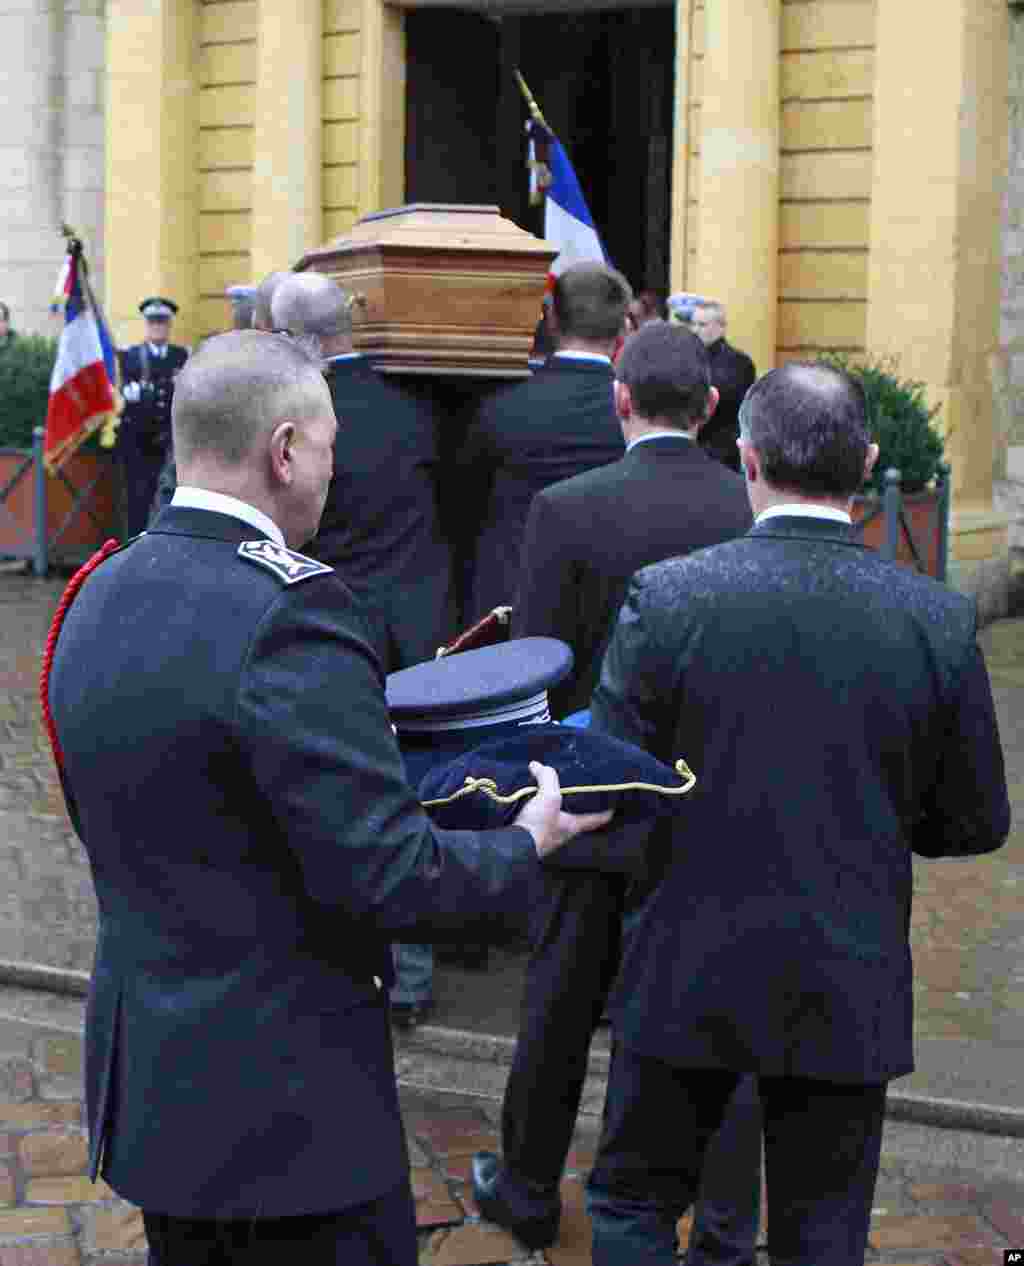 The coffin of police officer Franck Brinsolaro is carried into Sainte Croix church for the funeral ceremony in Bernay, western France, Jan. 15, 2015.